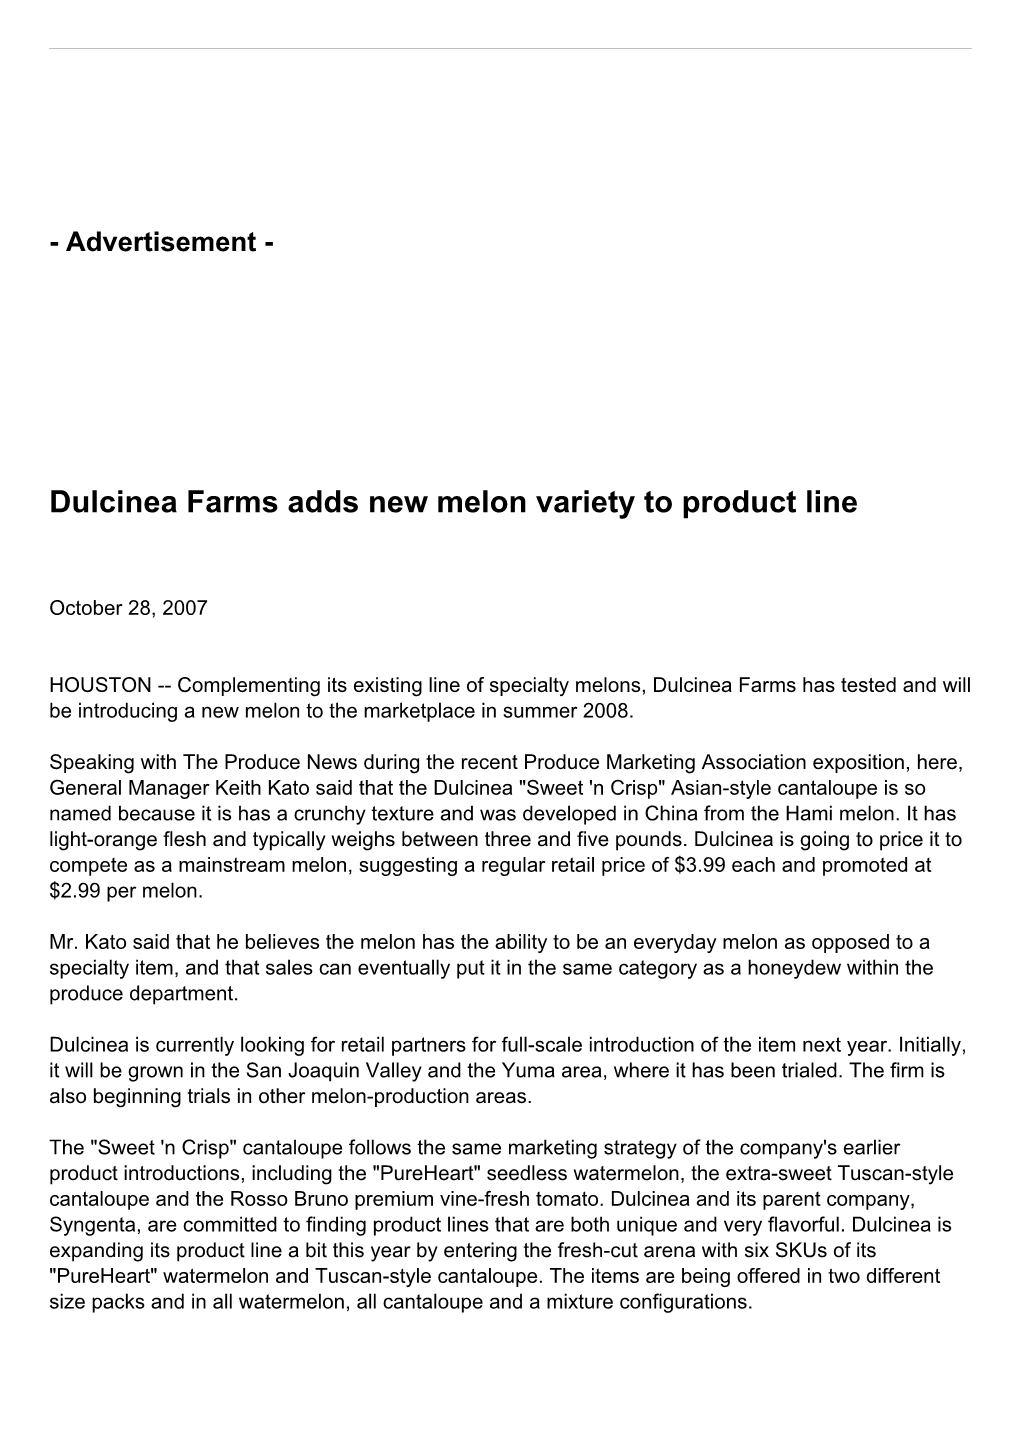 Dulcinea Farms Adds New Melon Variety to Product Line